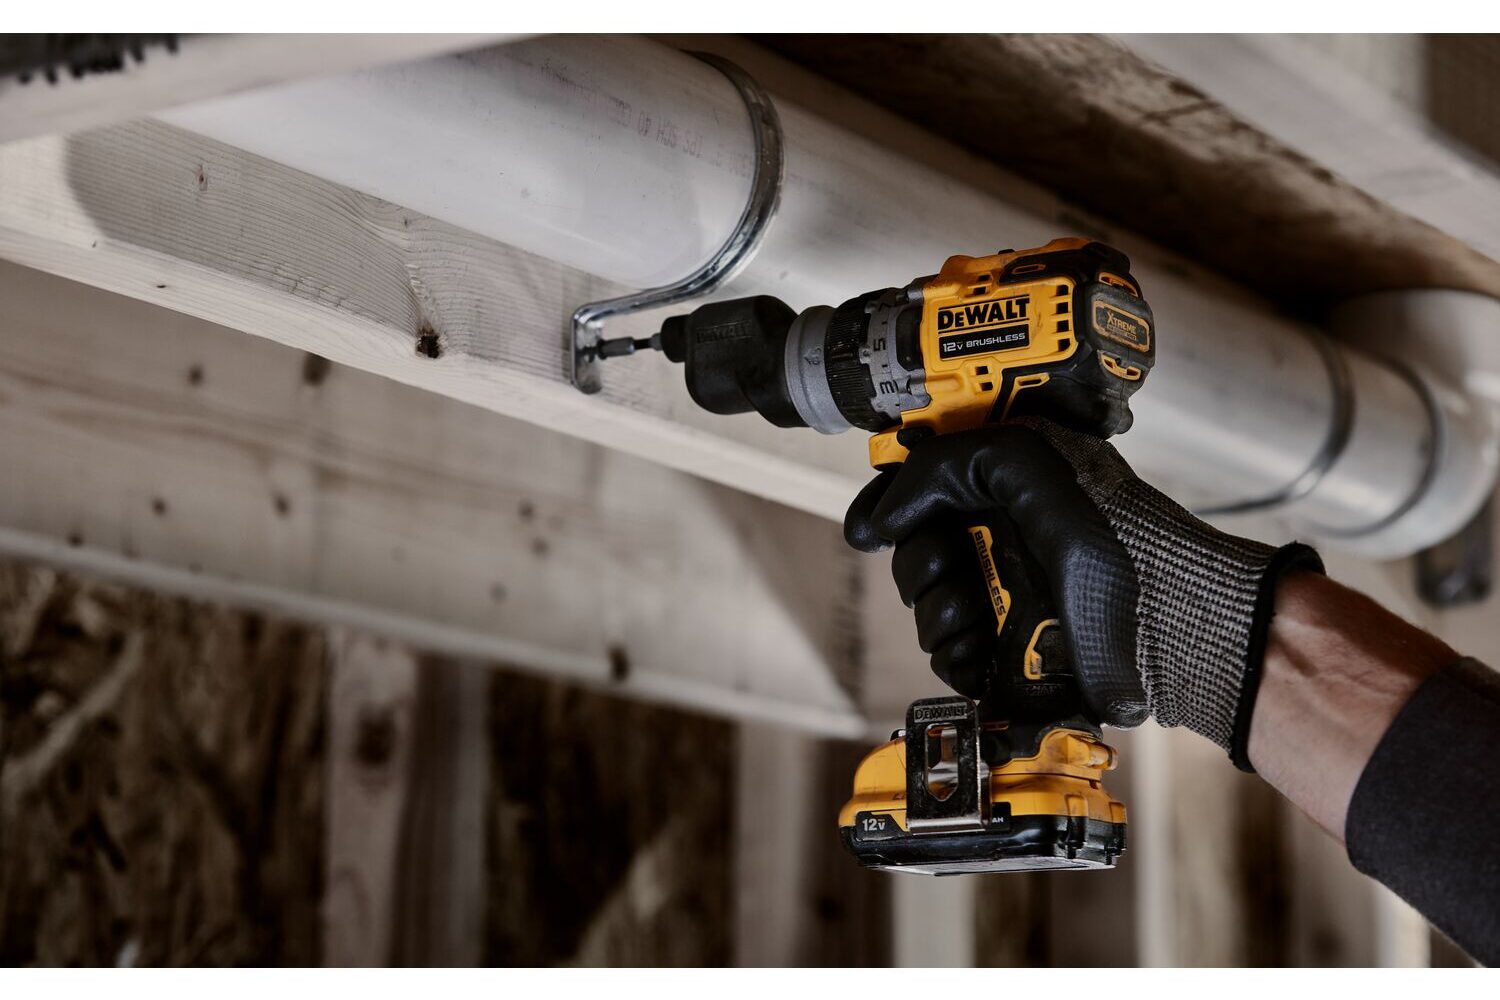 The 12V MAX 5-in-1 Drill/Driver is used to fasten a fixture around a pipe. 